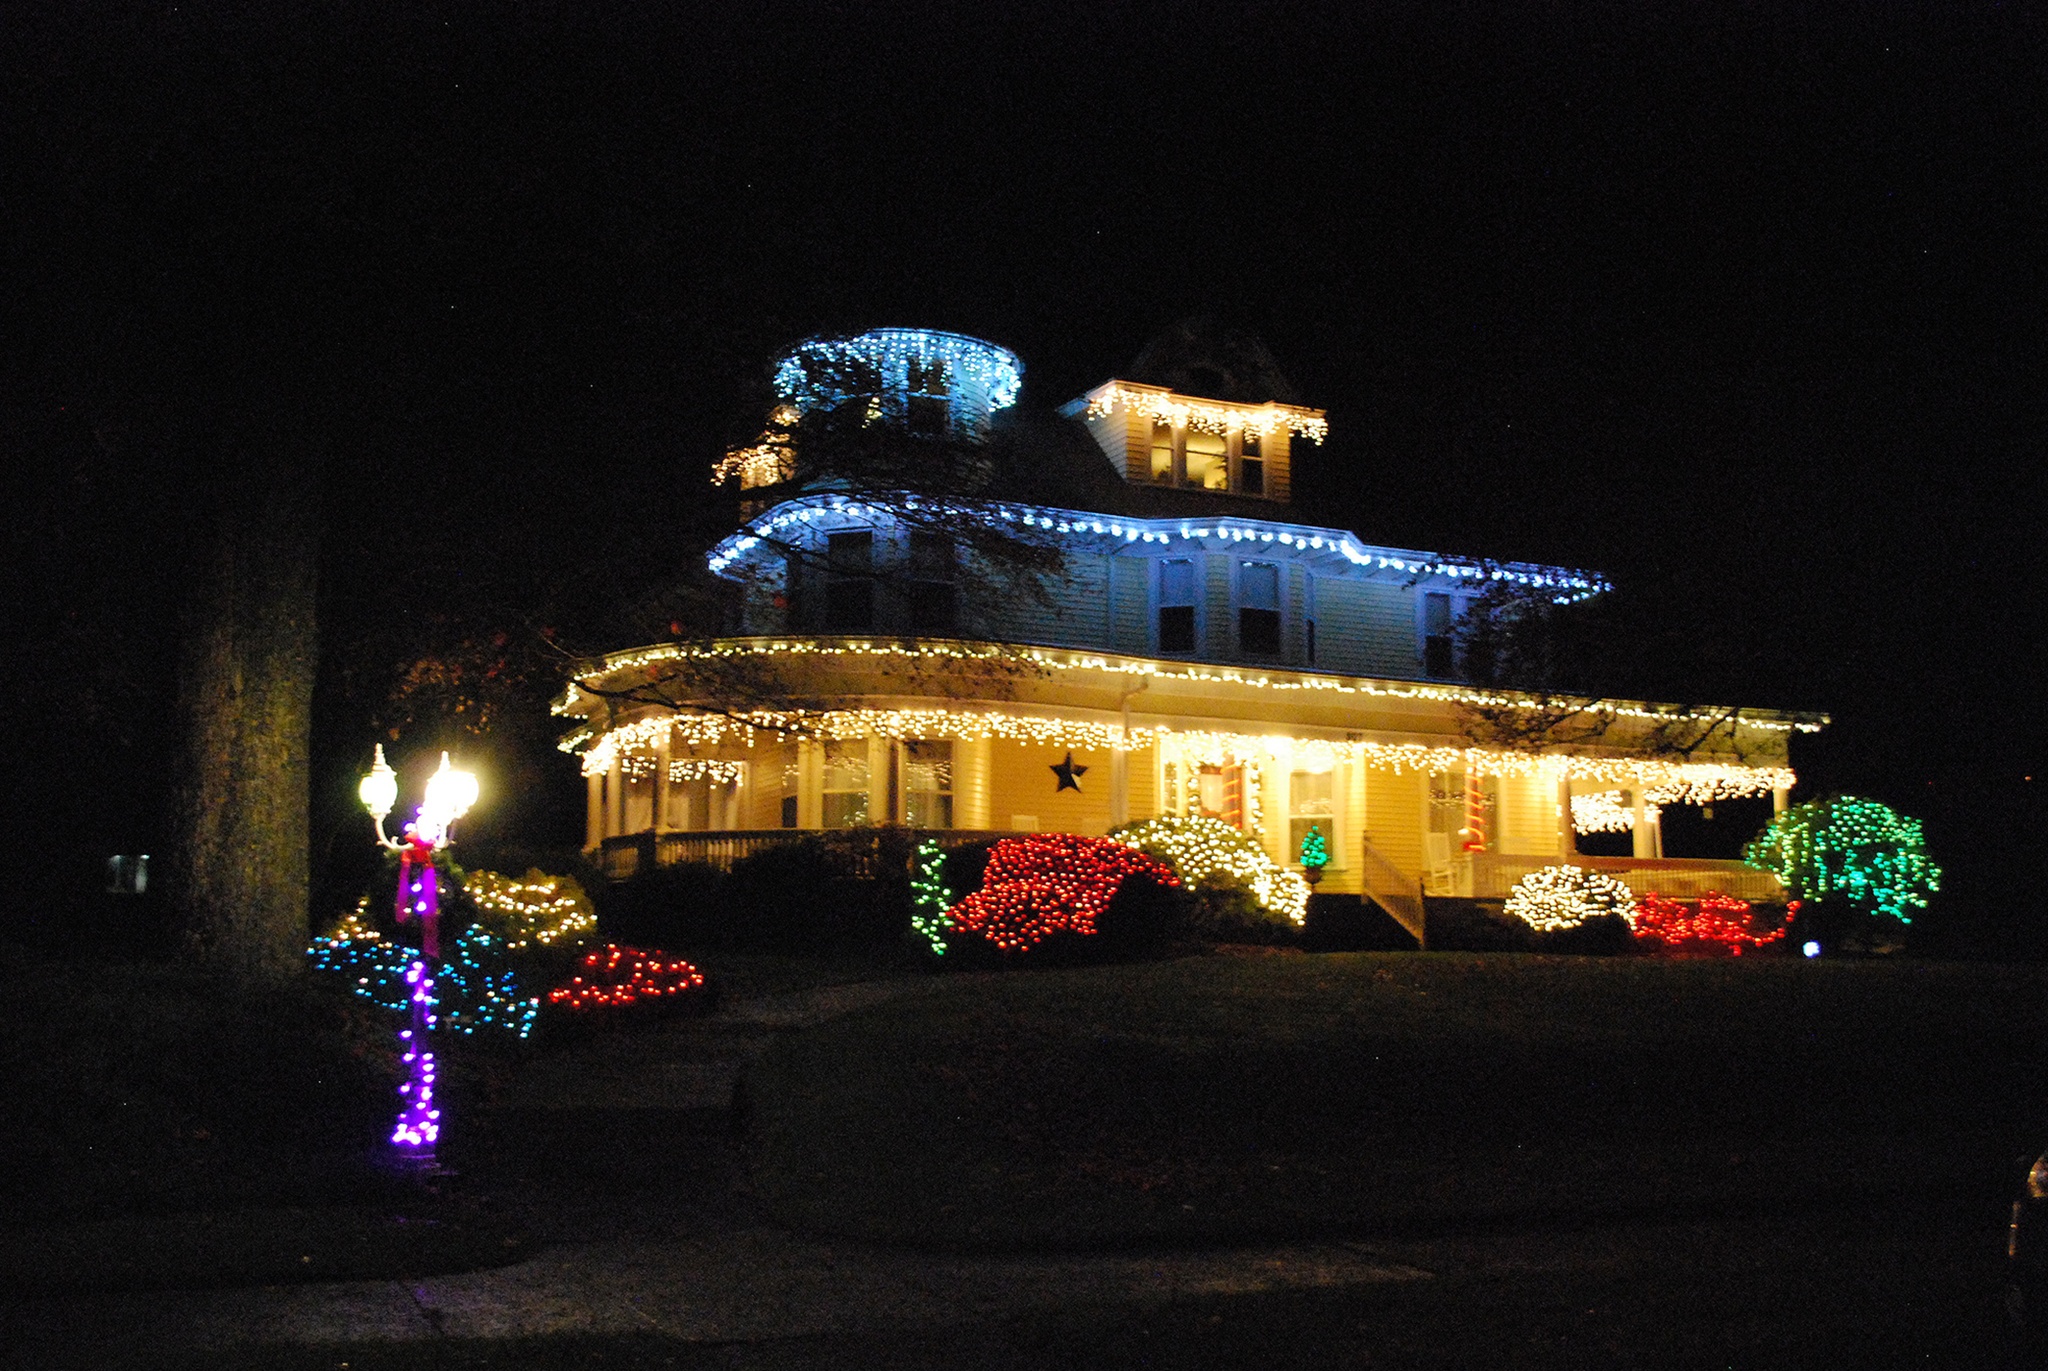 Christmas lights adorn the exterior of the Aberdeen Mansion. There will be three holiday tours offered there this month. Proceeds for ticket sales will go to the Aberdeen Lions Club. (Terri Harber|The Daily World)